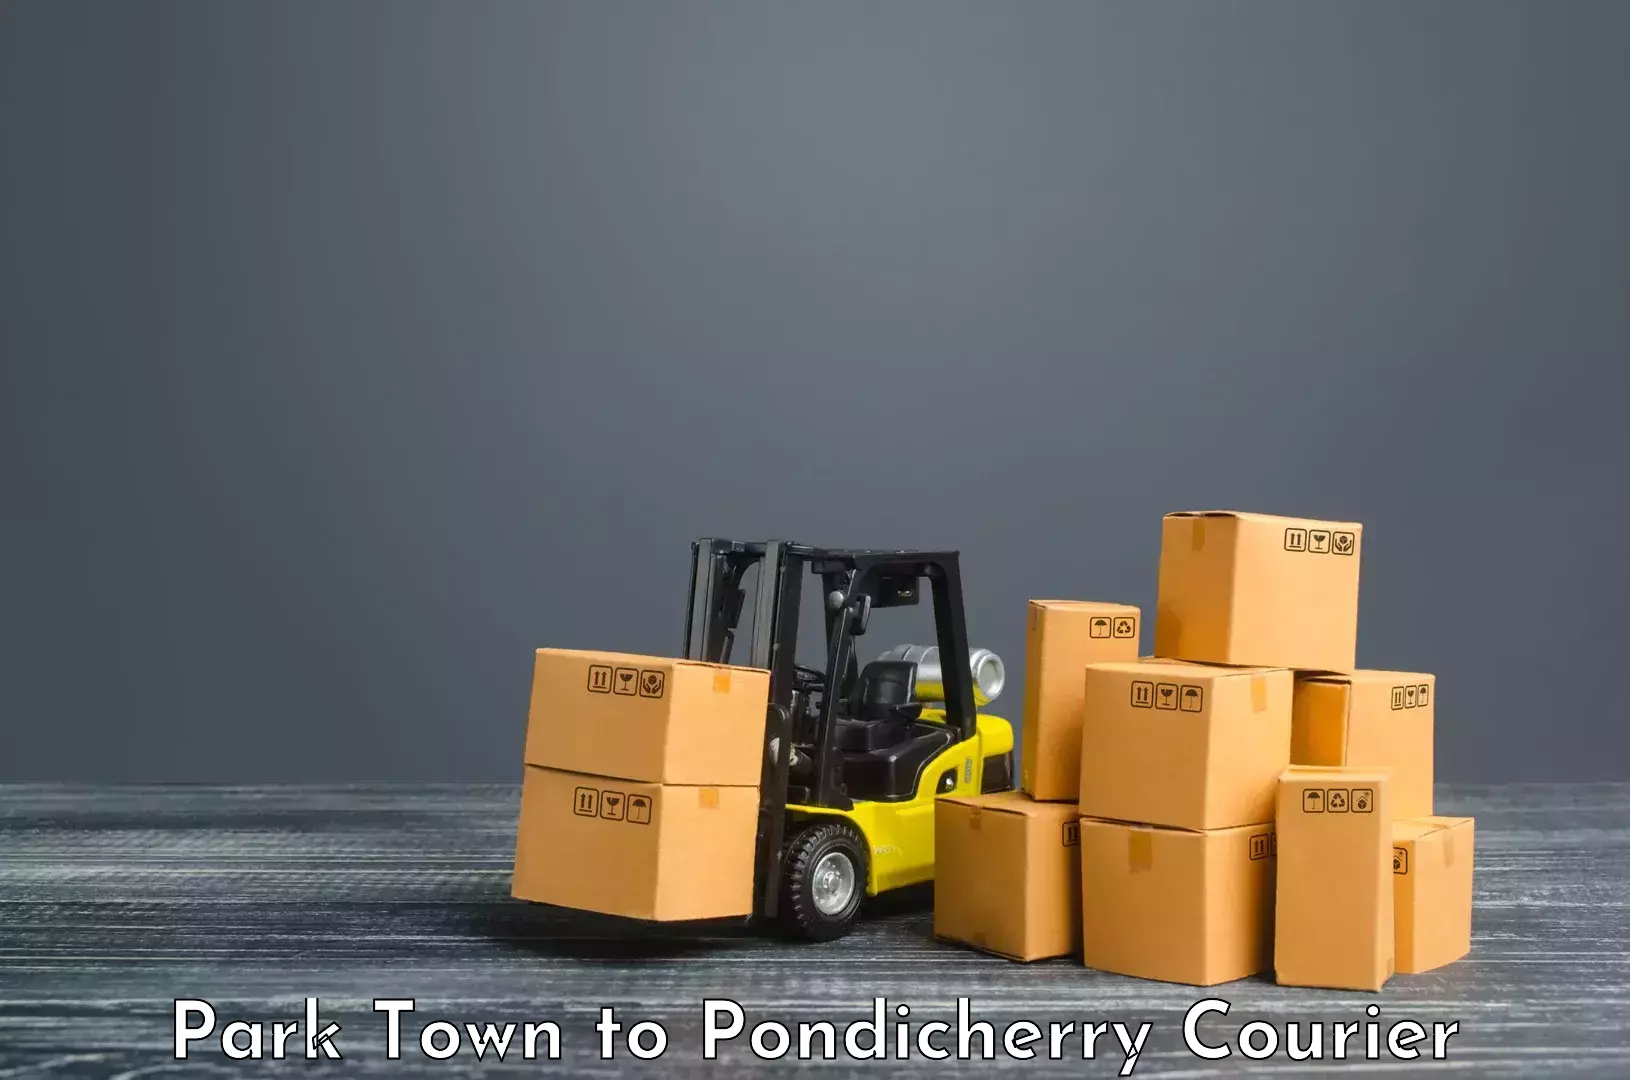 Global shipping networks Park Town to Pondicherry